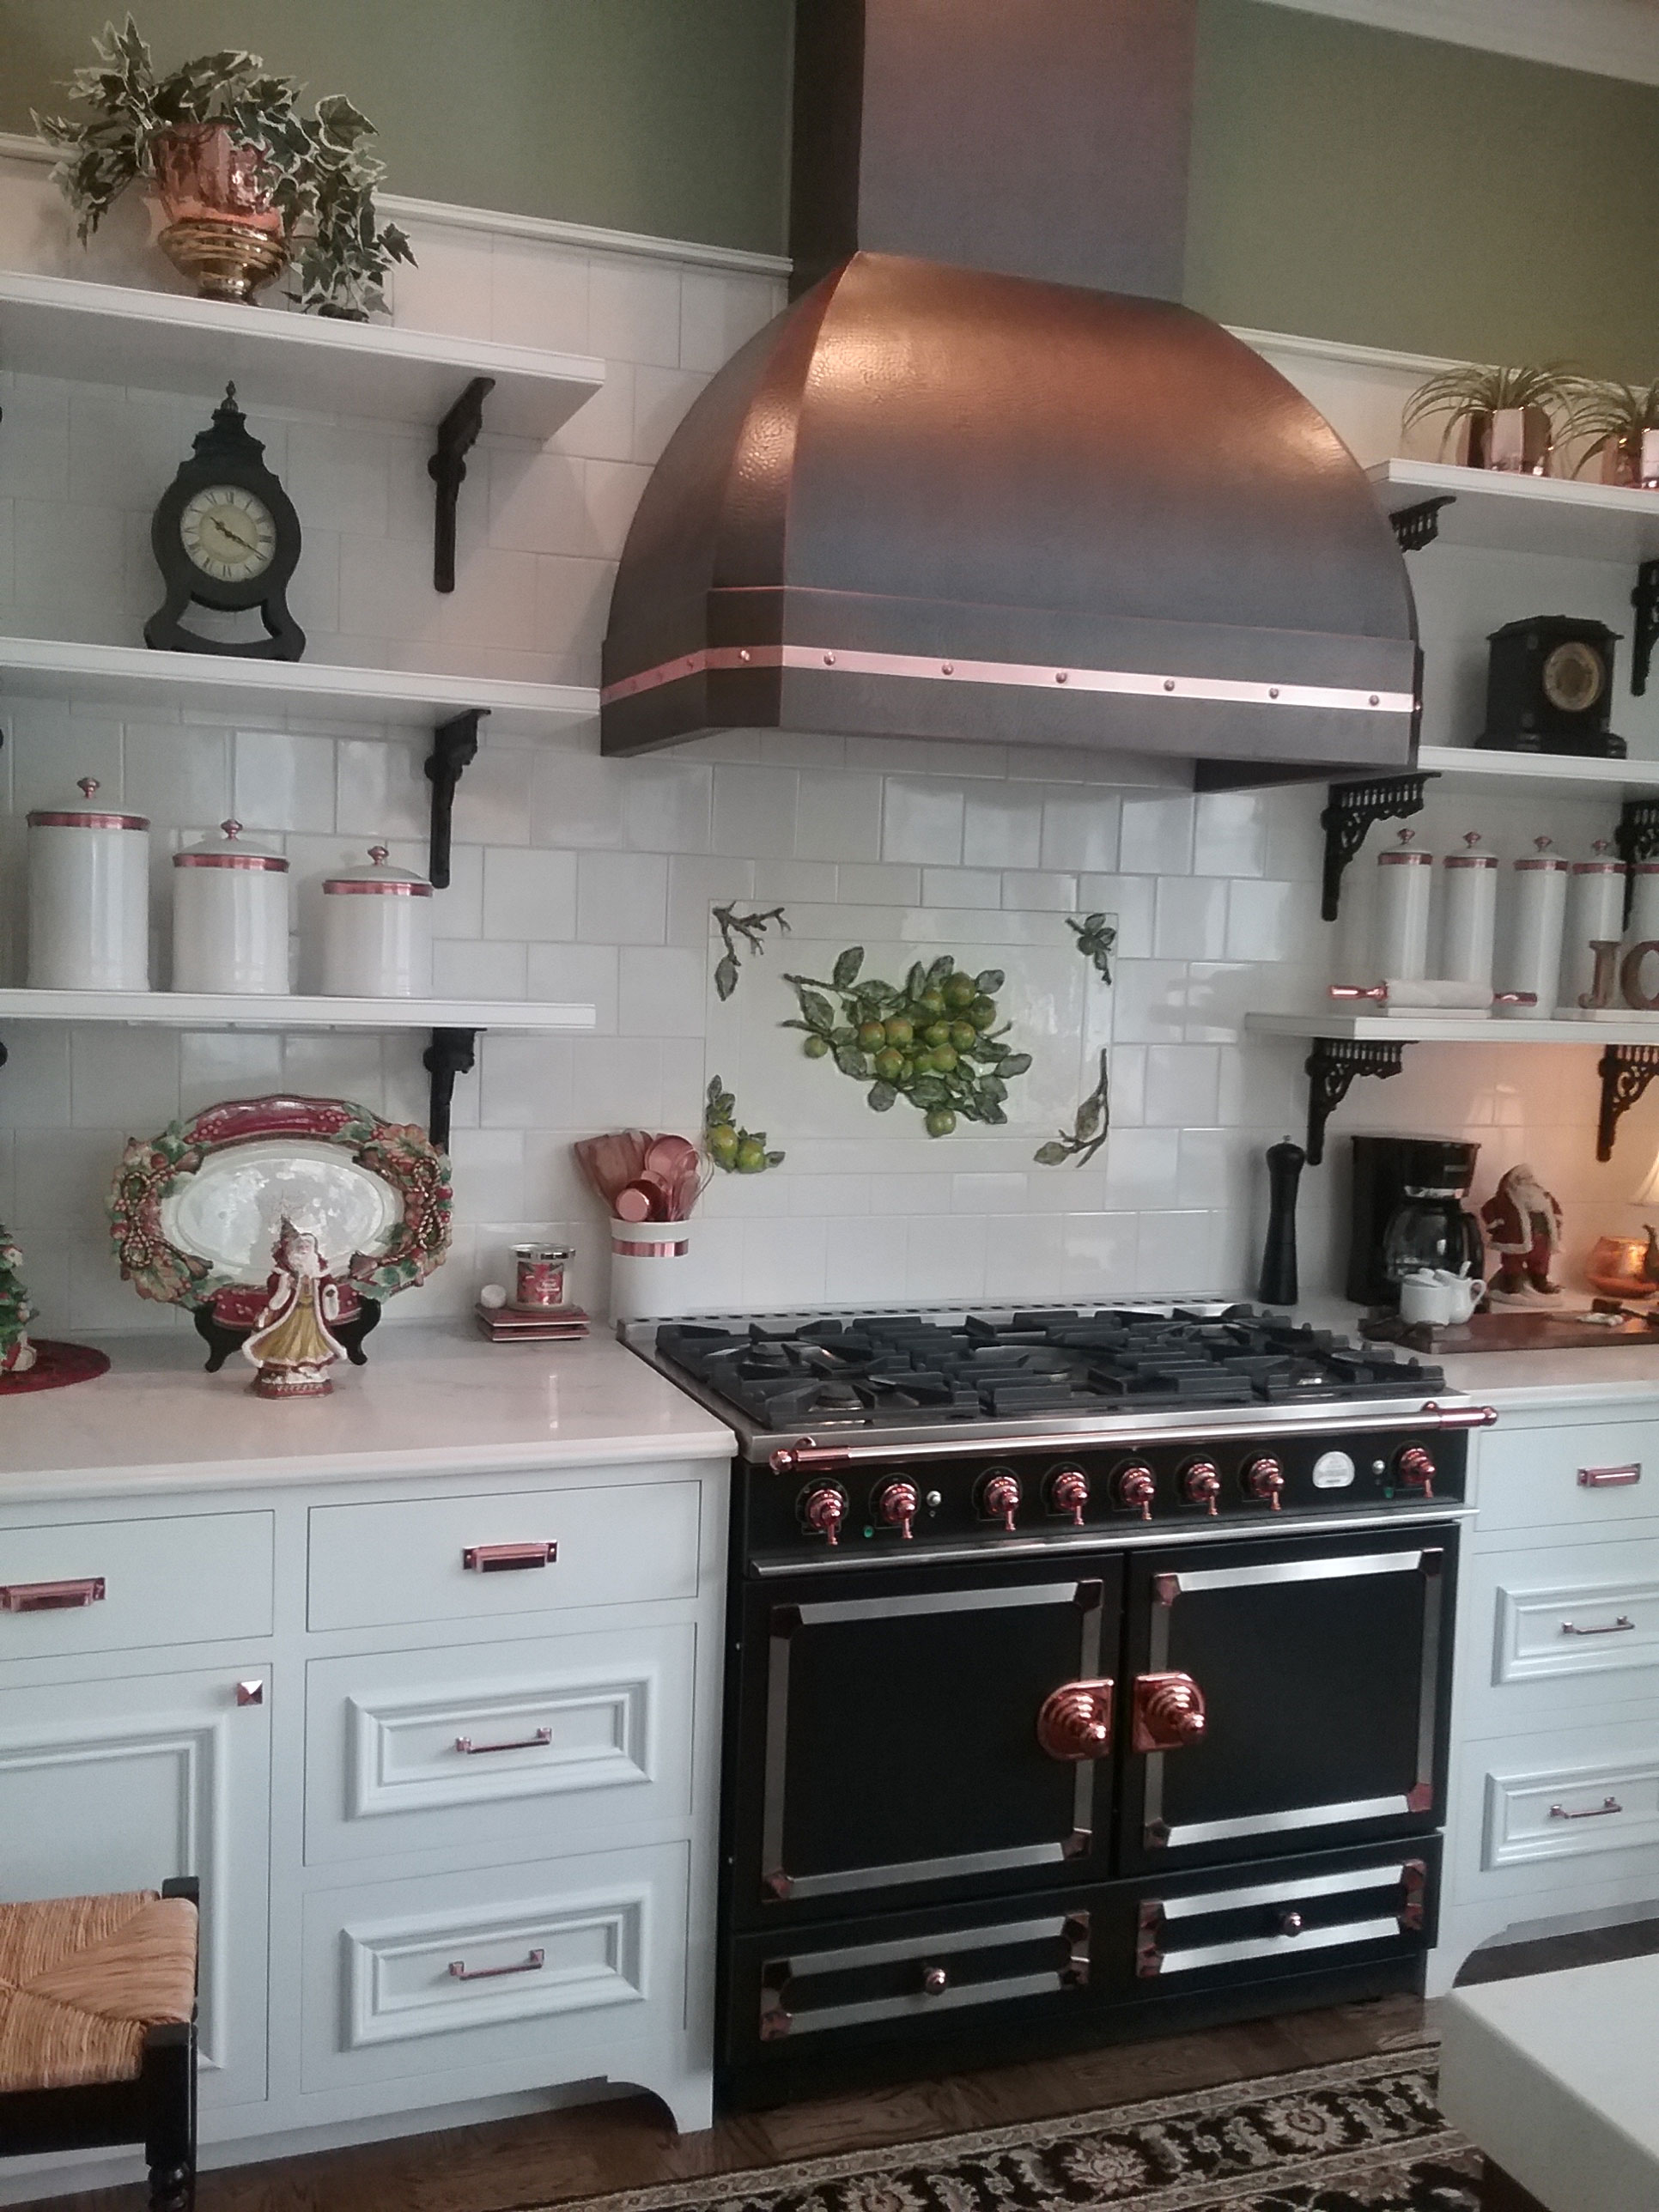 Copper range hood with unique dome shape in a kitchen with black appliances.